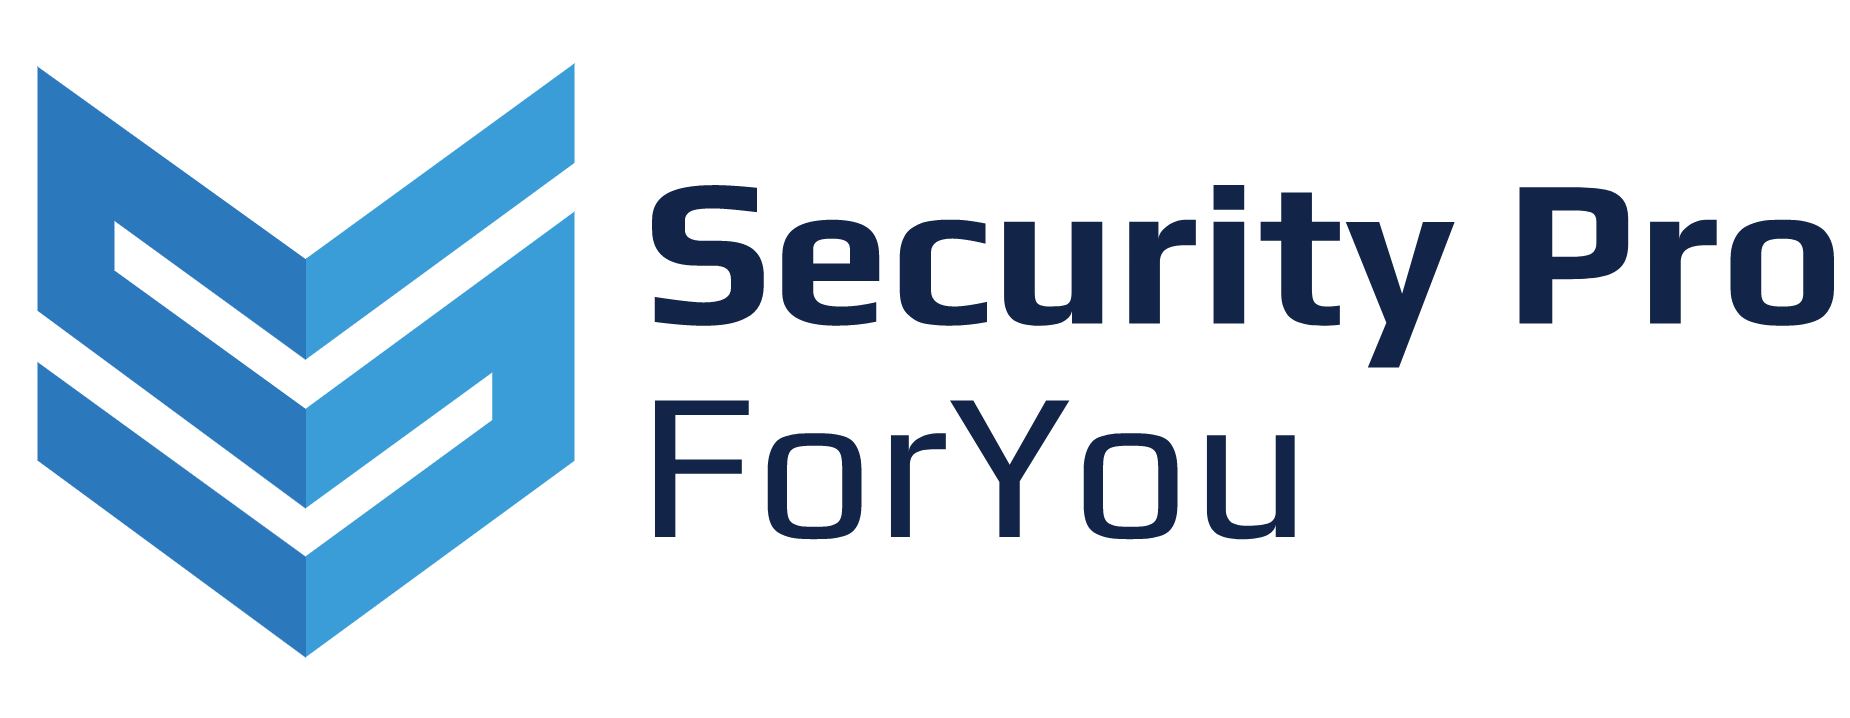 security pro for you professional security services